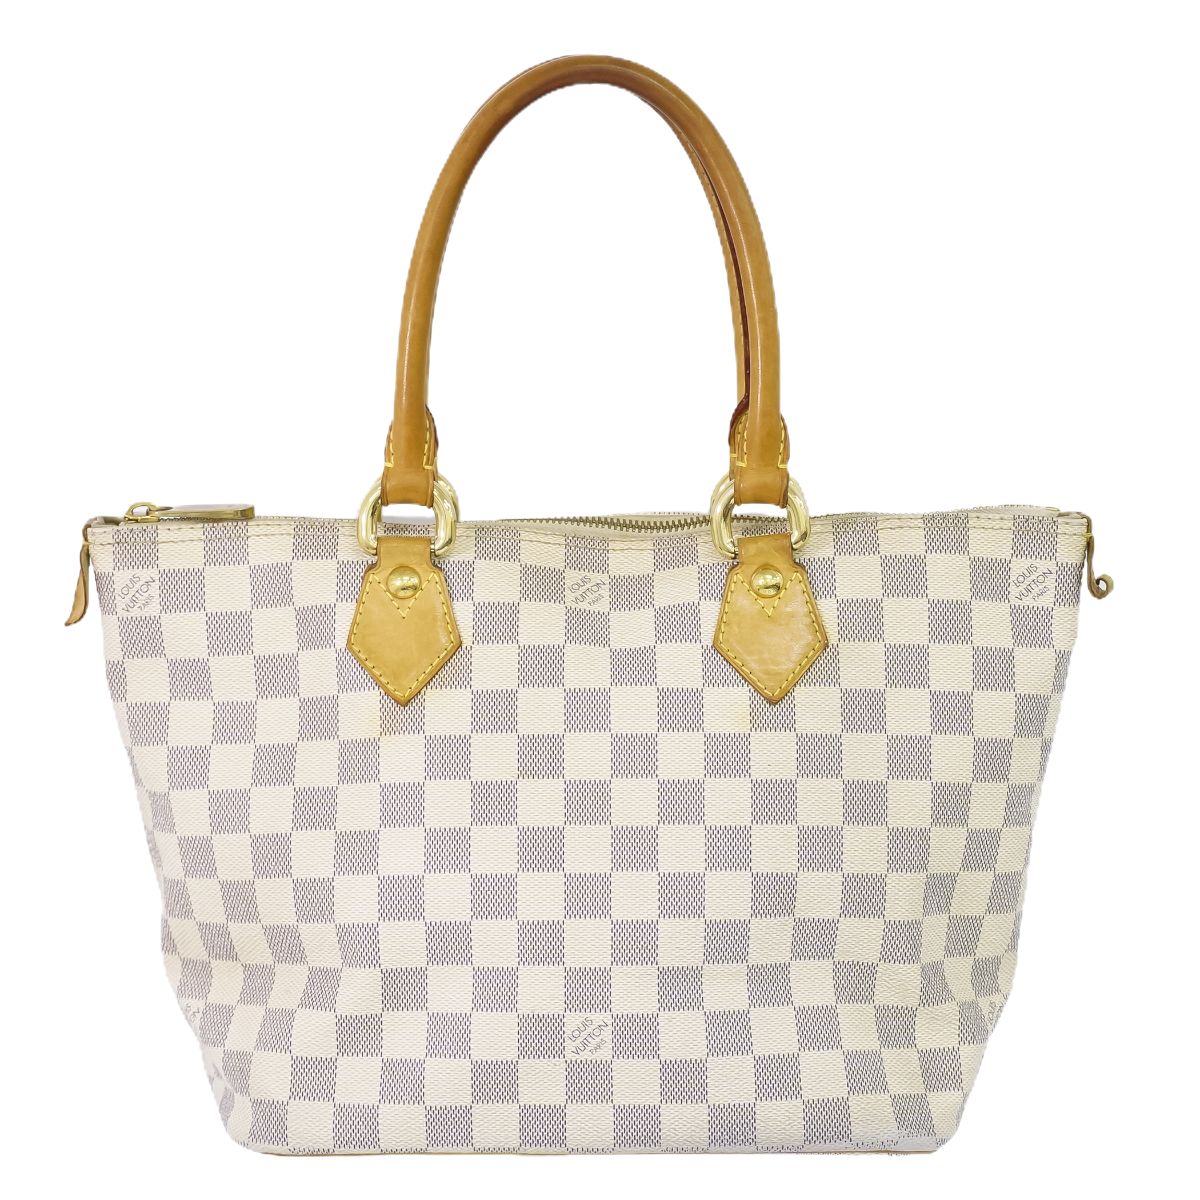 LOUIS VUITTON LV サレヤ PM ダミエ アズール トートバッグ N51186